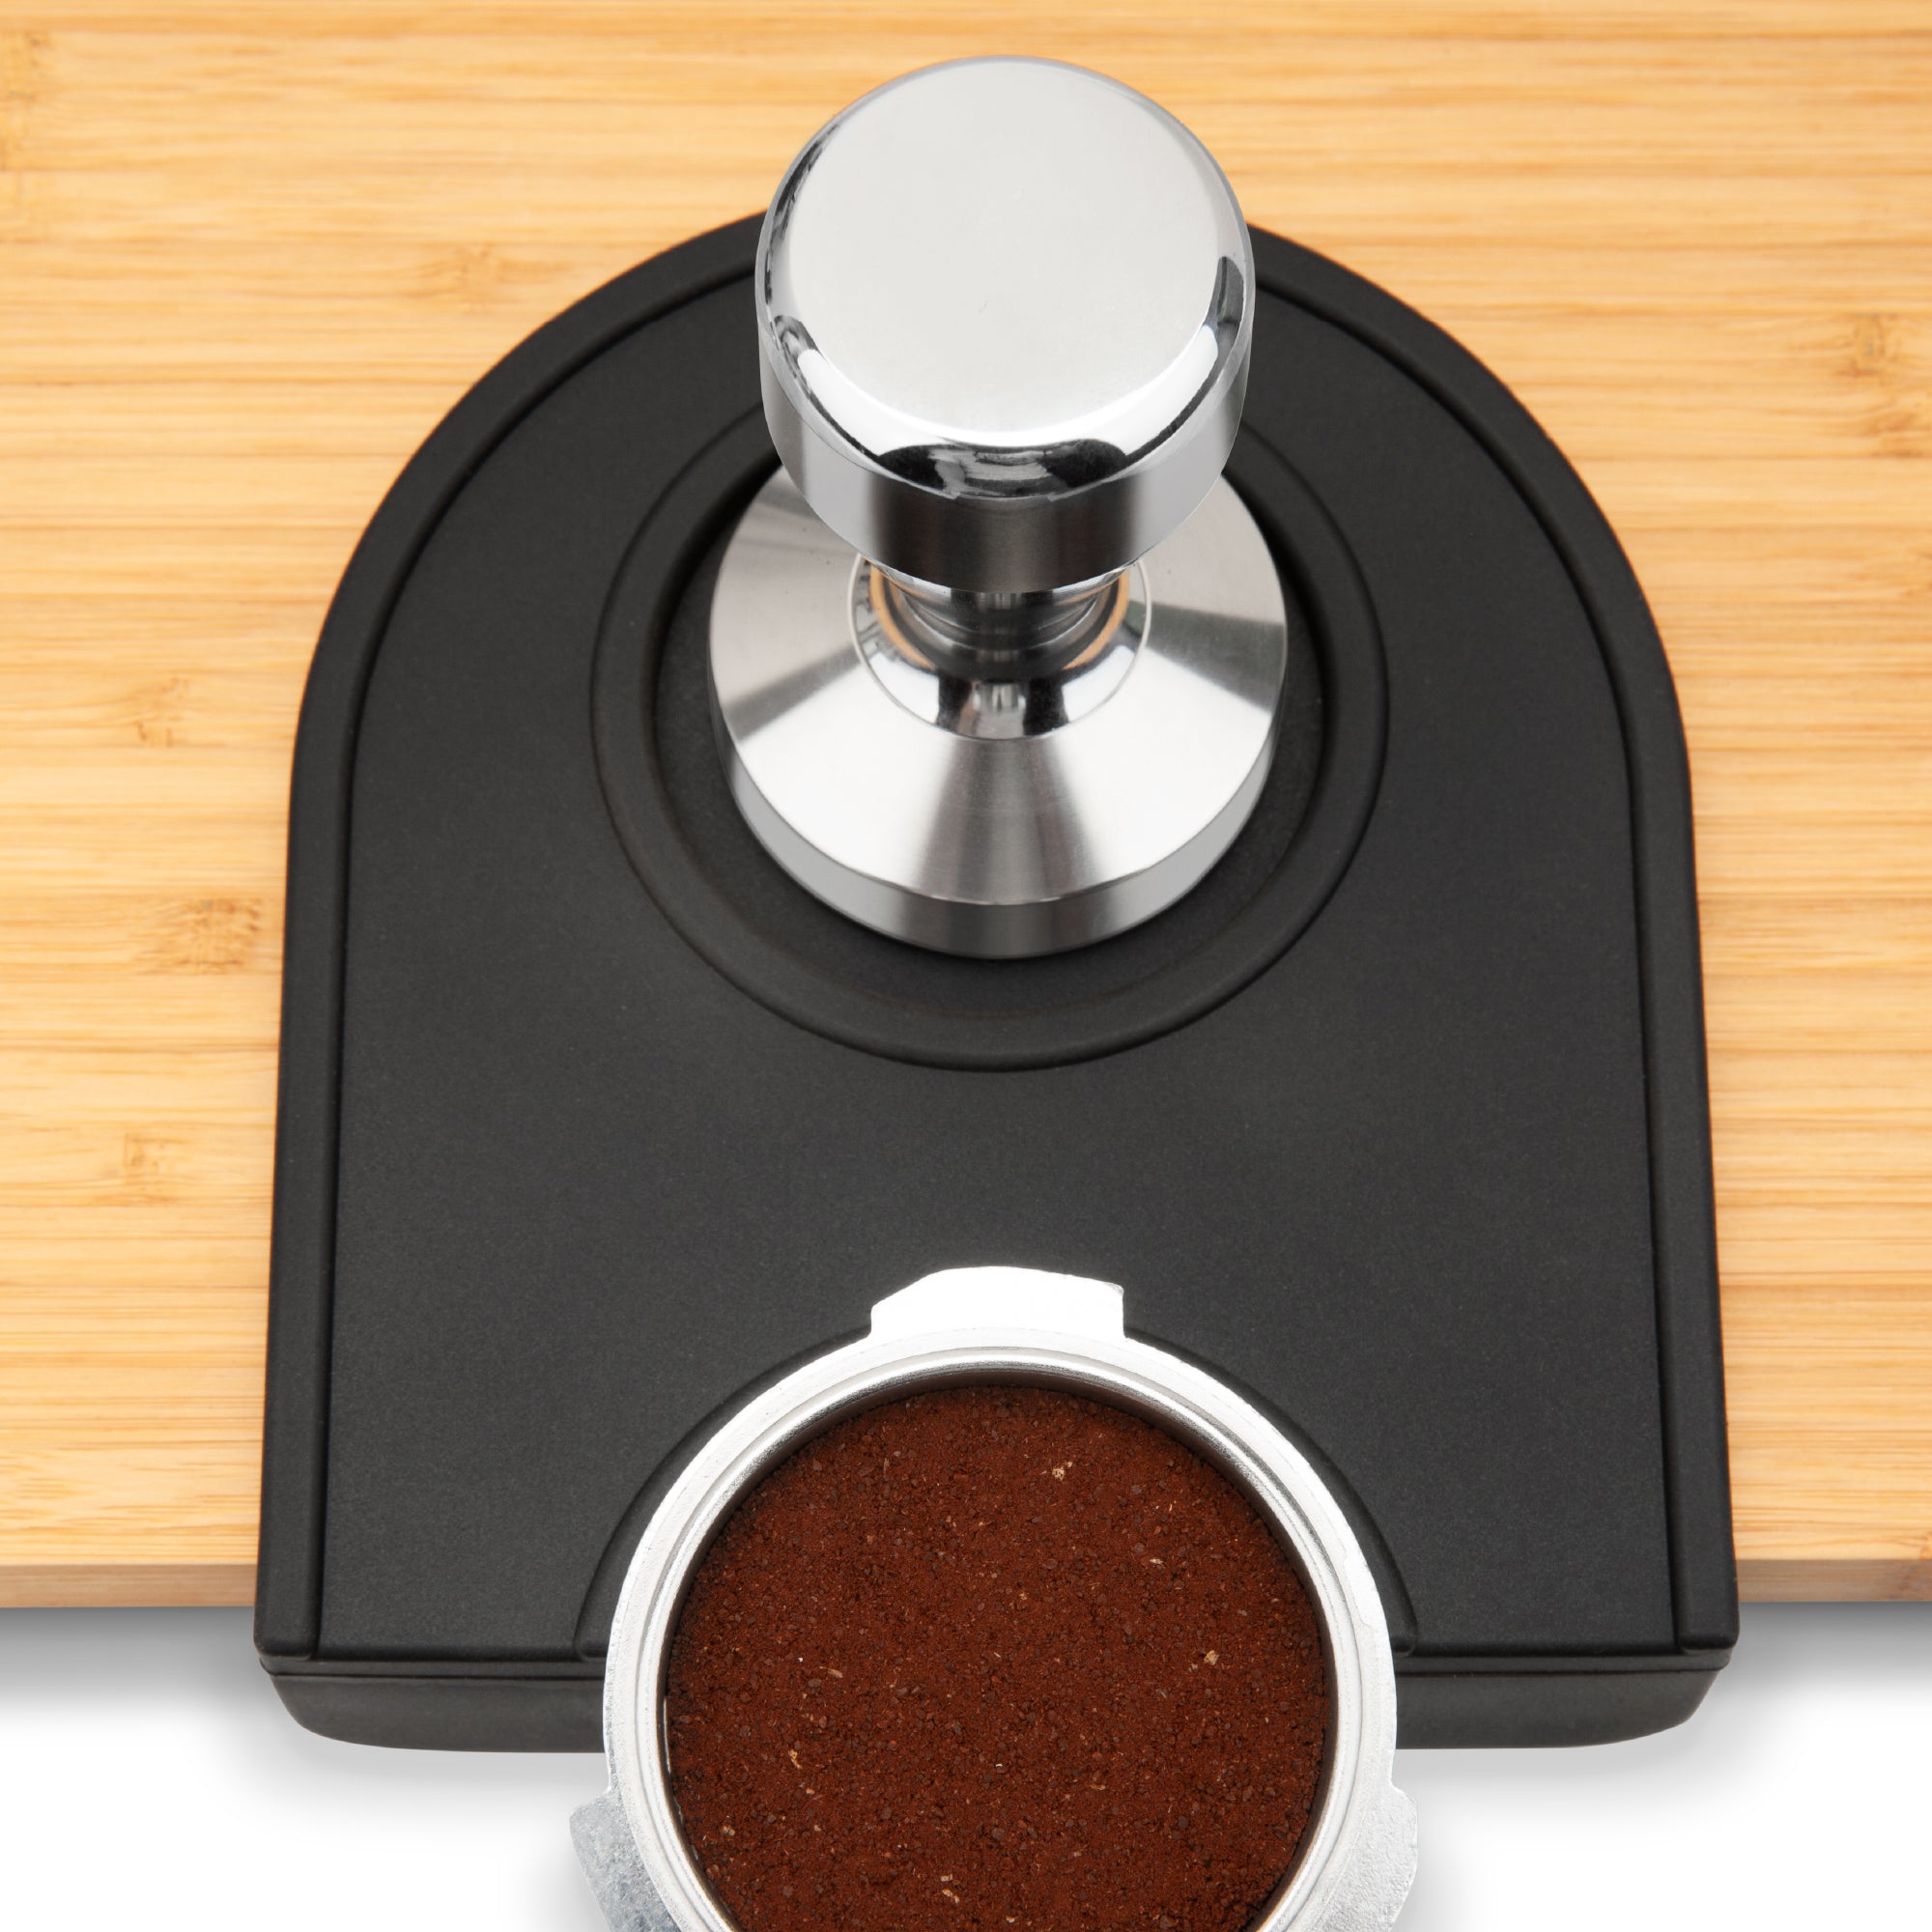 Rubber Tamping Mat for professional espresso making at restaurants, coffee  shops & bars